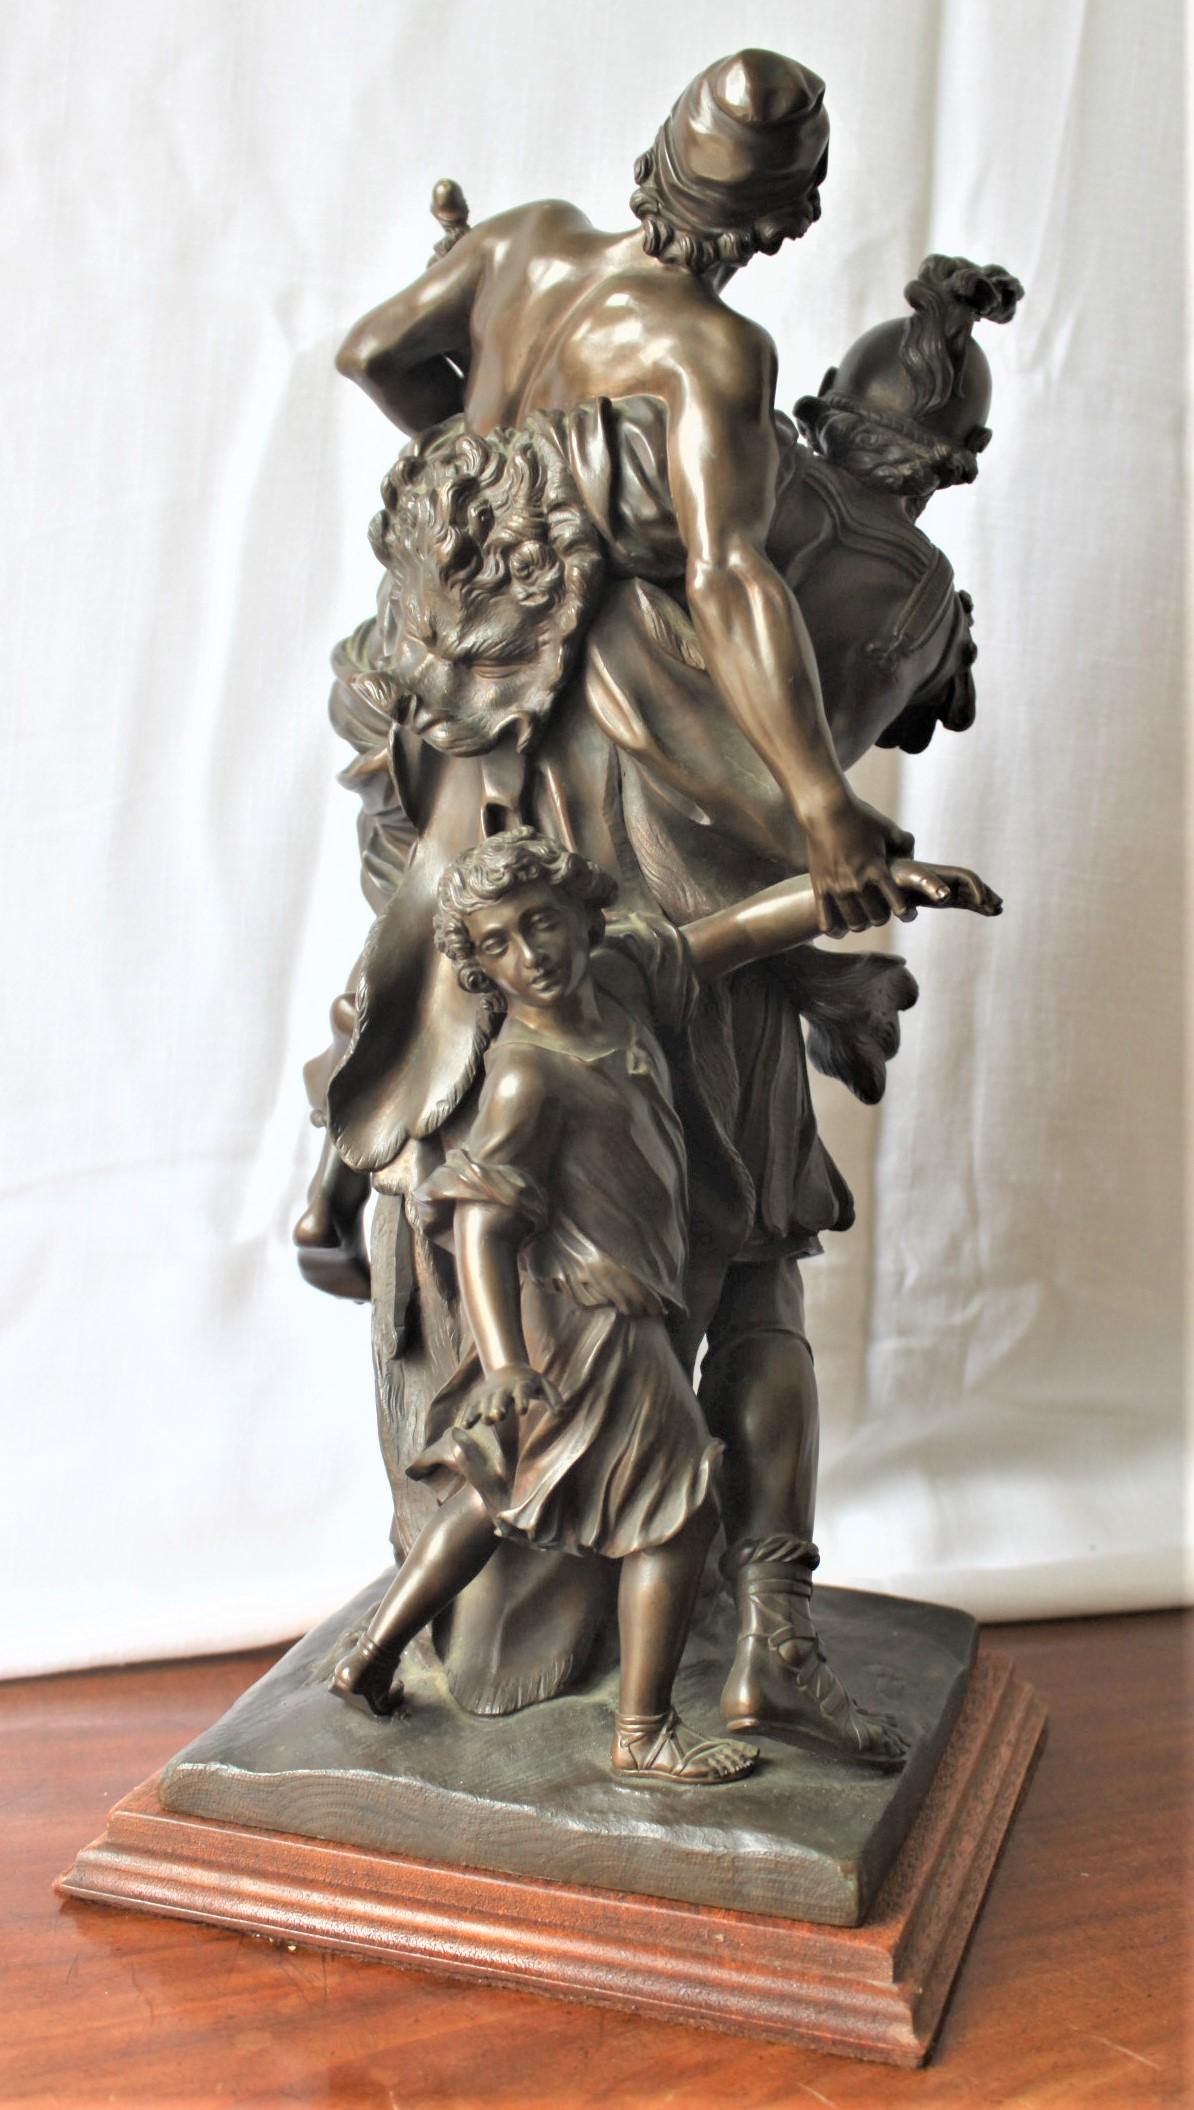 Antique French Bronze Neoclassical Revival Styled Greek Mythological Sculpture In Good Condition For Sale In Hamilton, Ontario